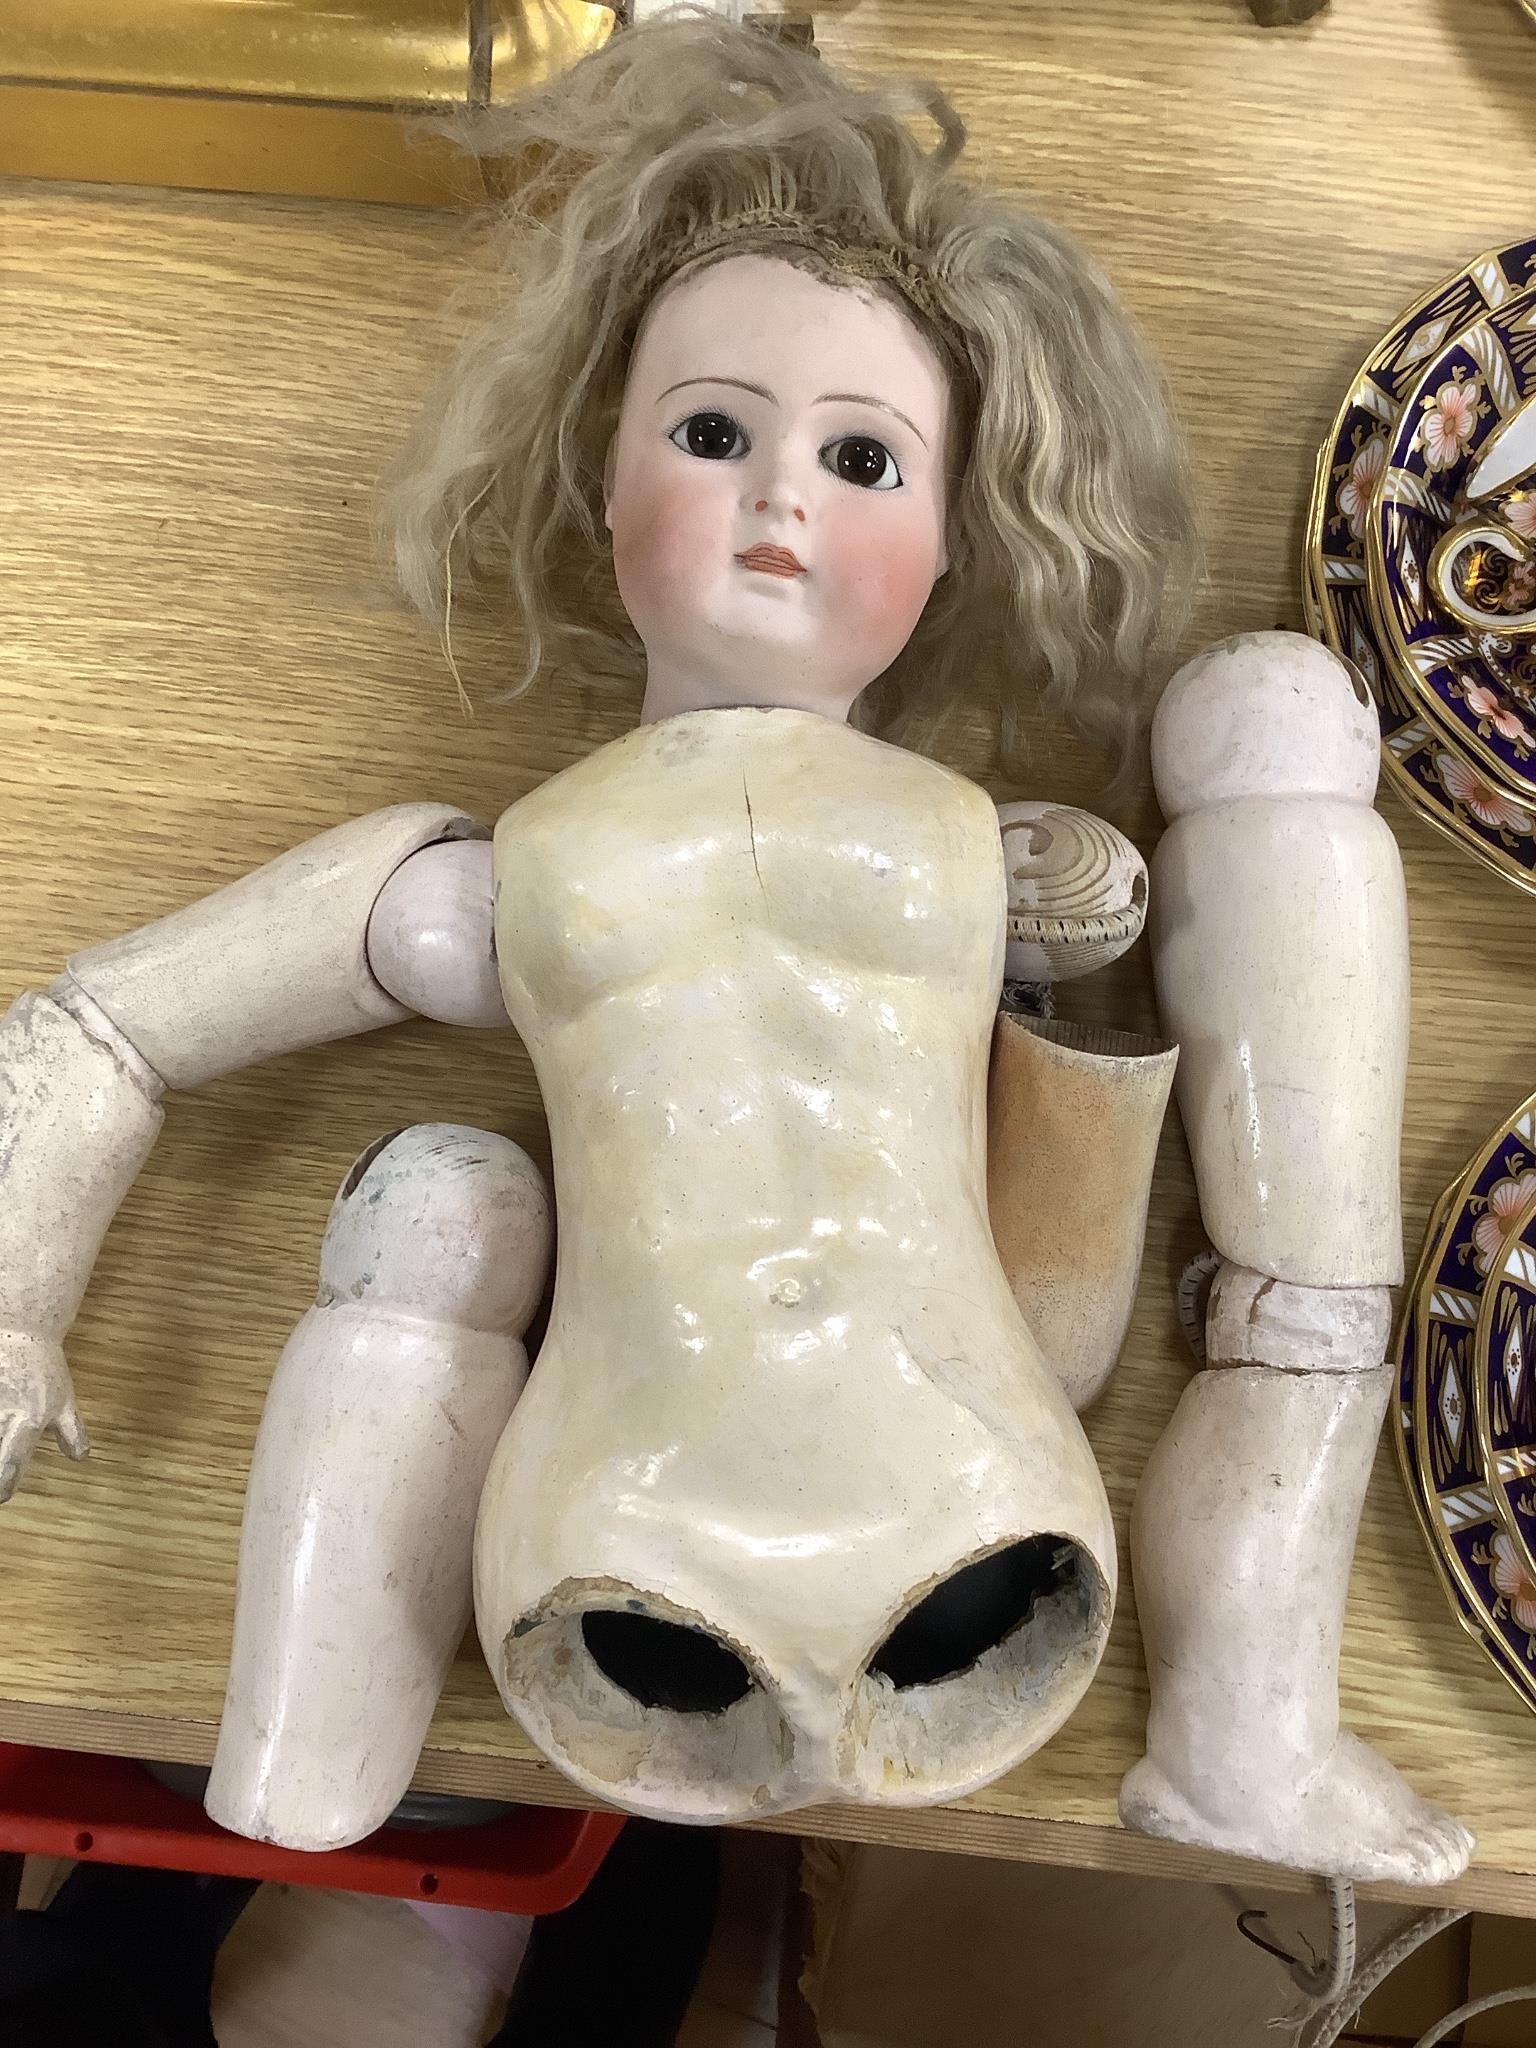 An early 20th century Lanternier & Cie, Limoges France bisque head doll, Cherie no. 11 and a another bisque head doll marked 13, limbs incomplete